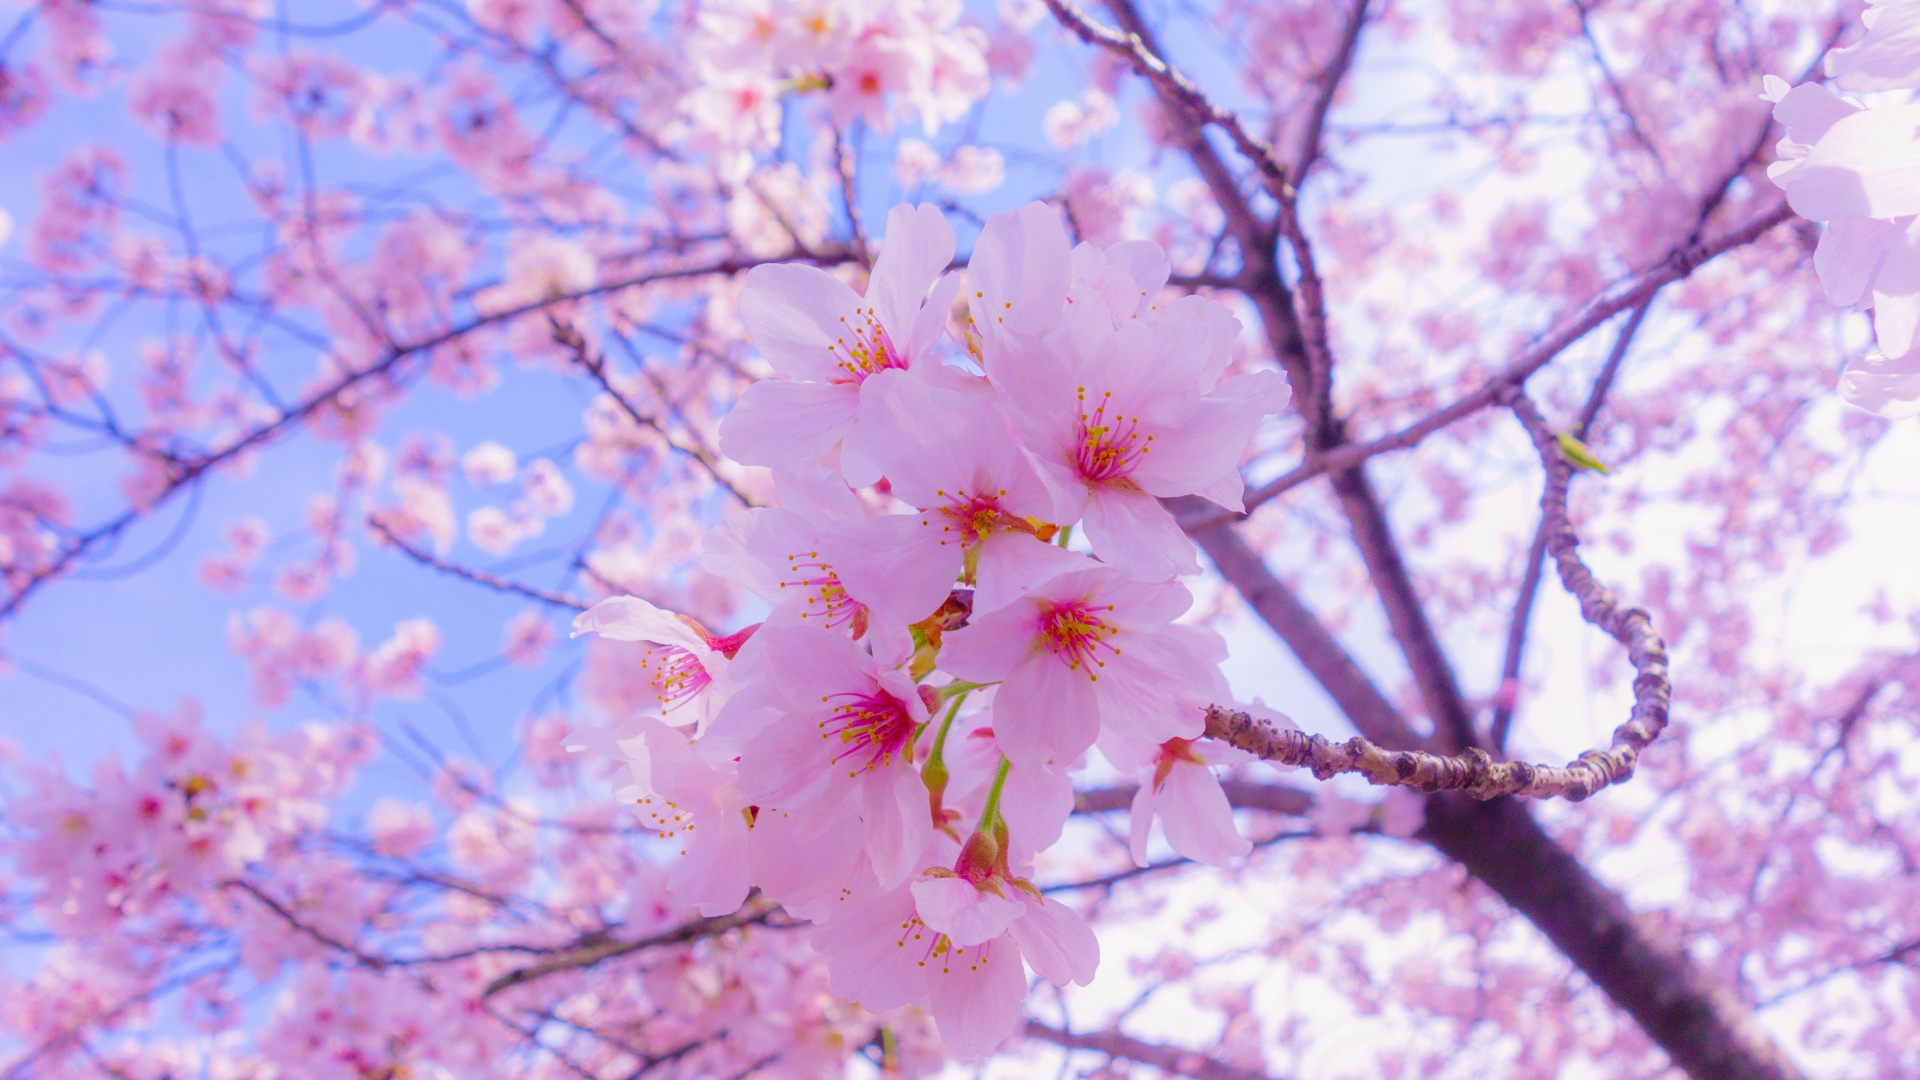 Pink Cherry Blossom Tree During Daytime. Wallpaper in 1920x1080 Resolution